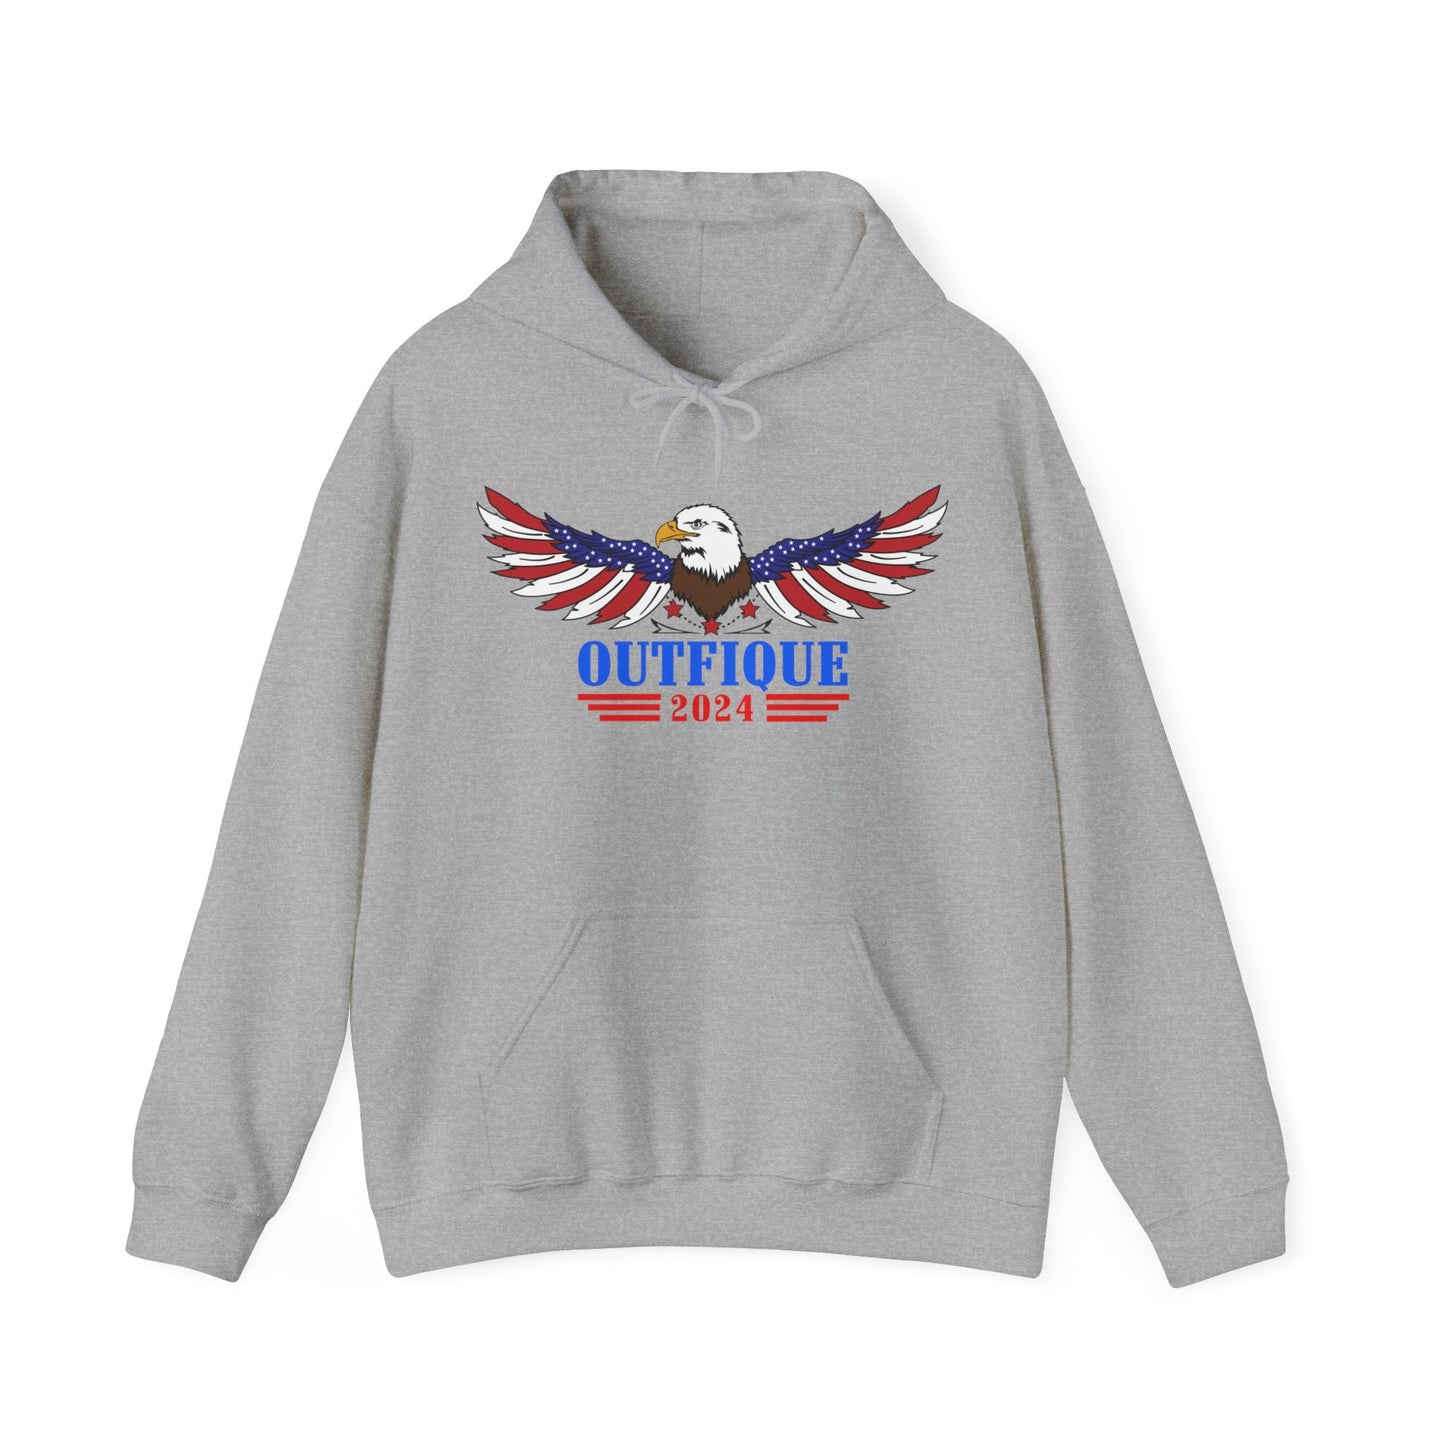 Outfique Campaign 2024 Hooded Sweatshirt | Outfique | Hoodie | DTG